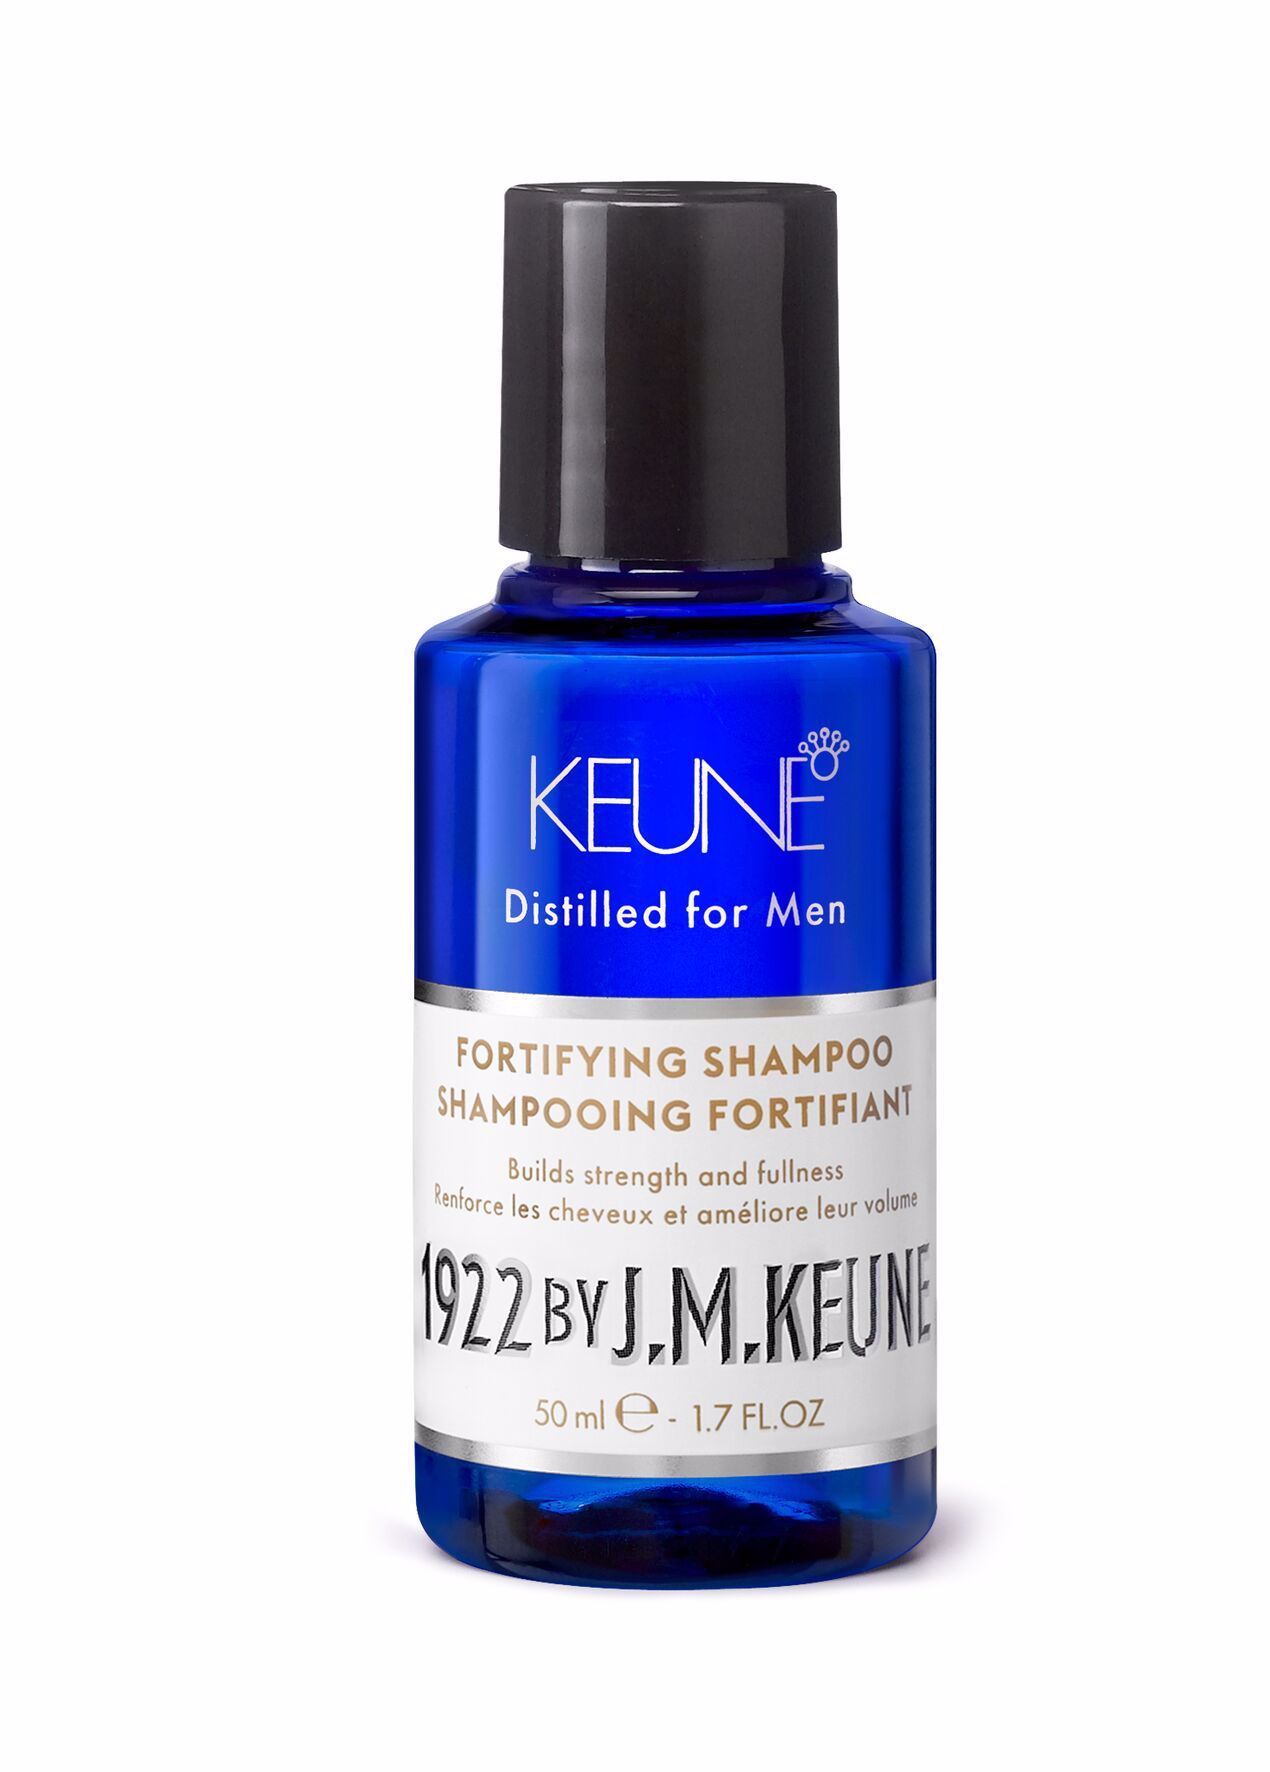 Try our men's shampoo with Vitamin H and eucalyptus for more volume and healthy hair on keune.ch! Strong hair despite hair loss.